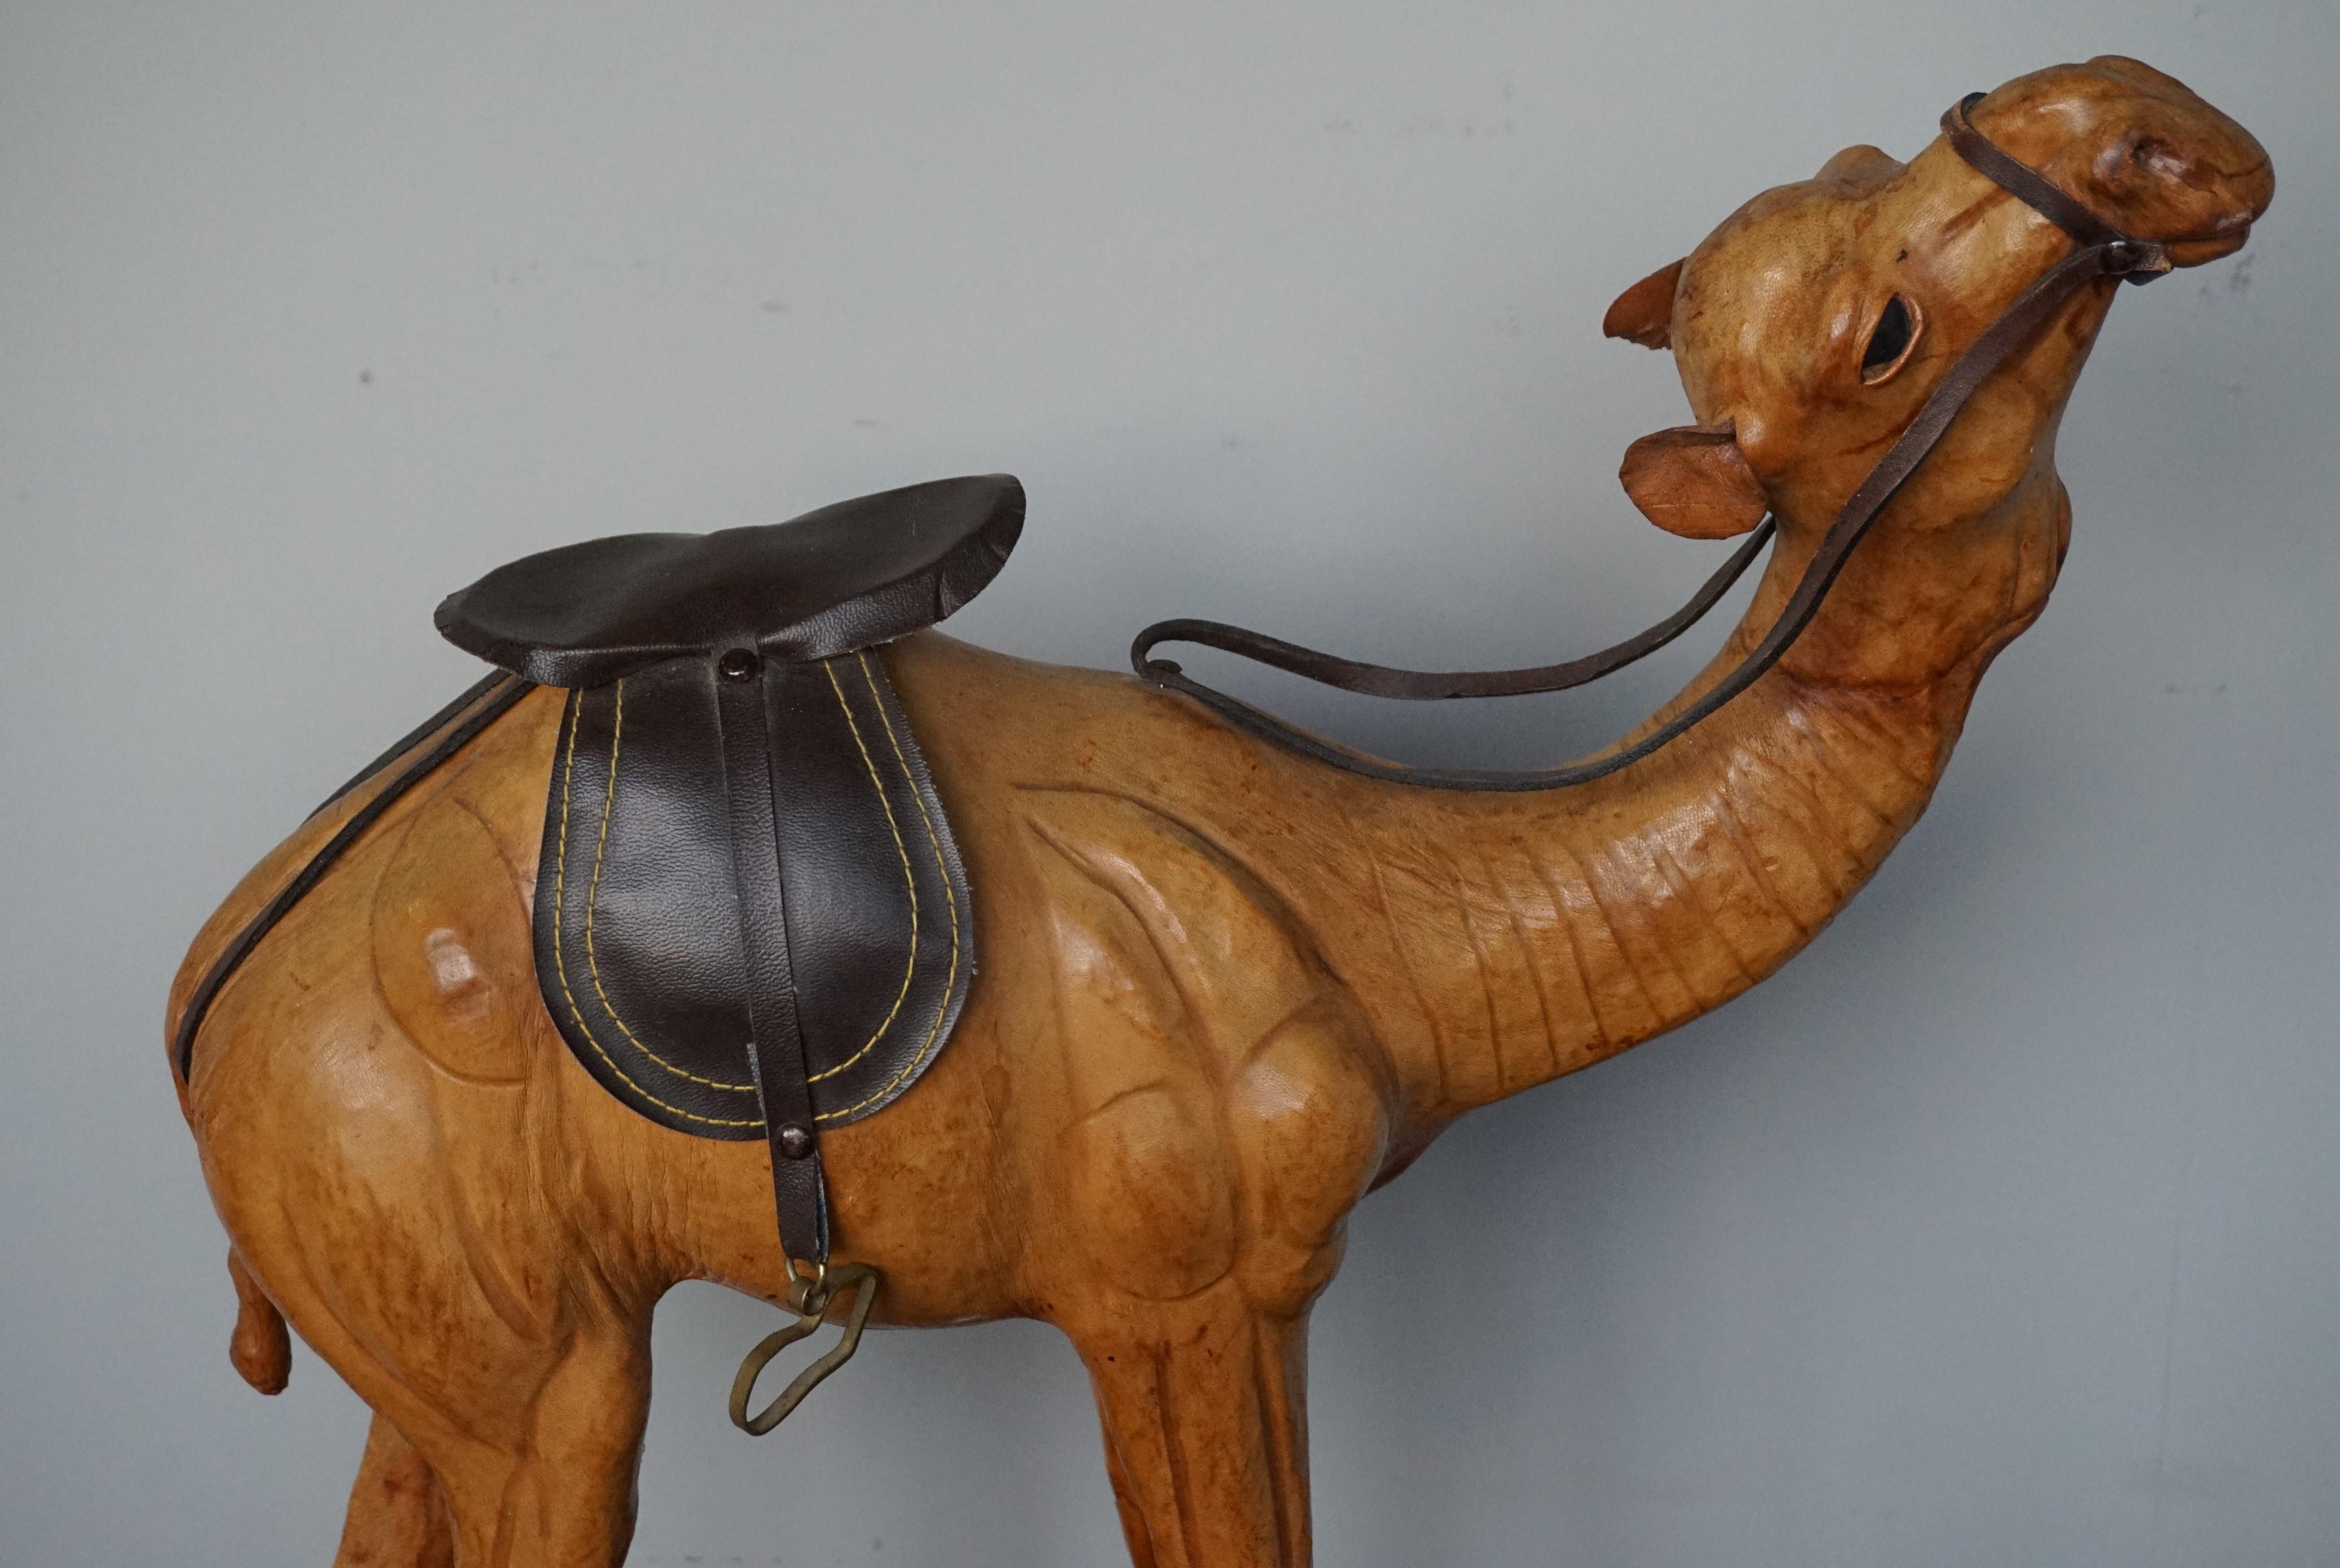 Sizable Camel Sculpture Leather on Hand Carved Wood with Harness 5